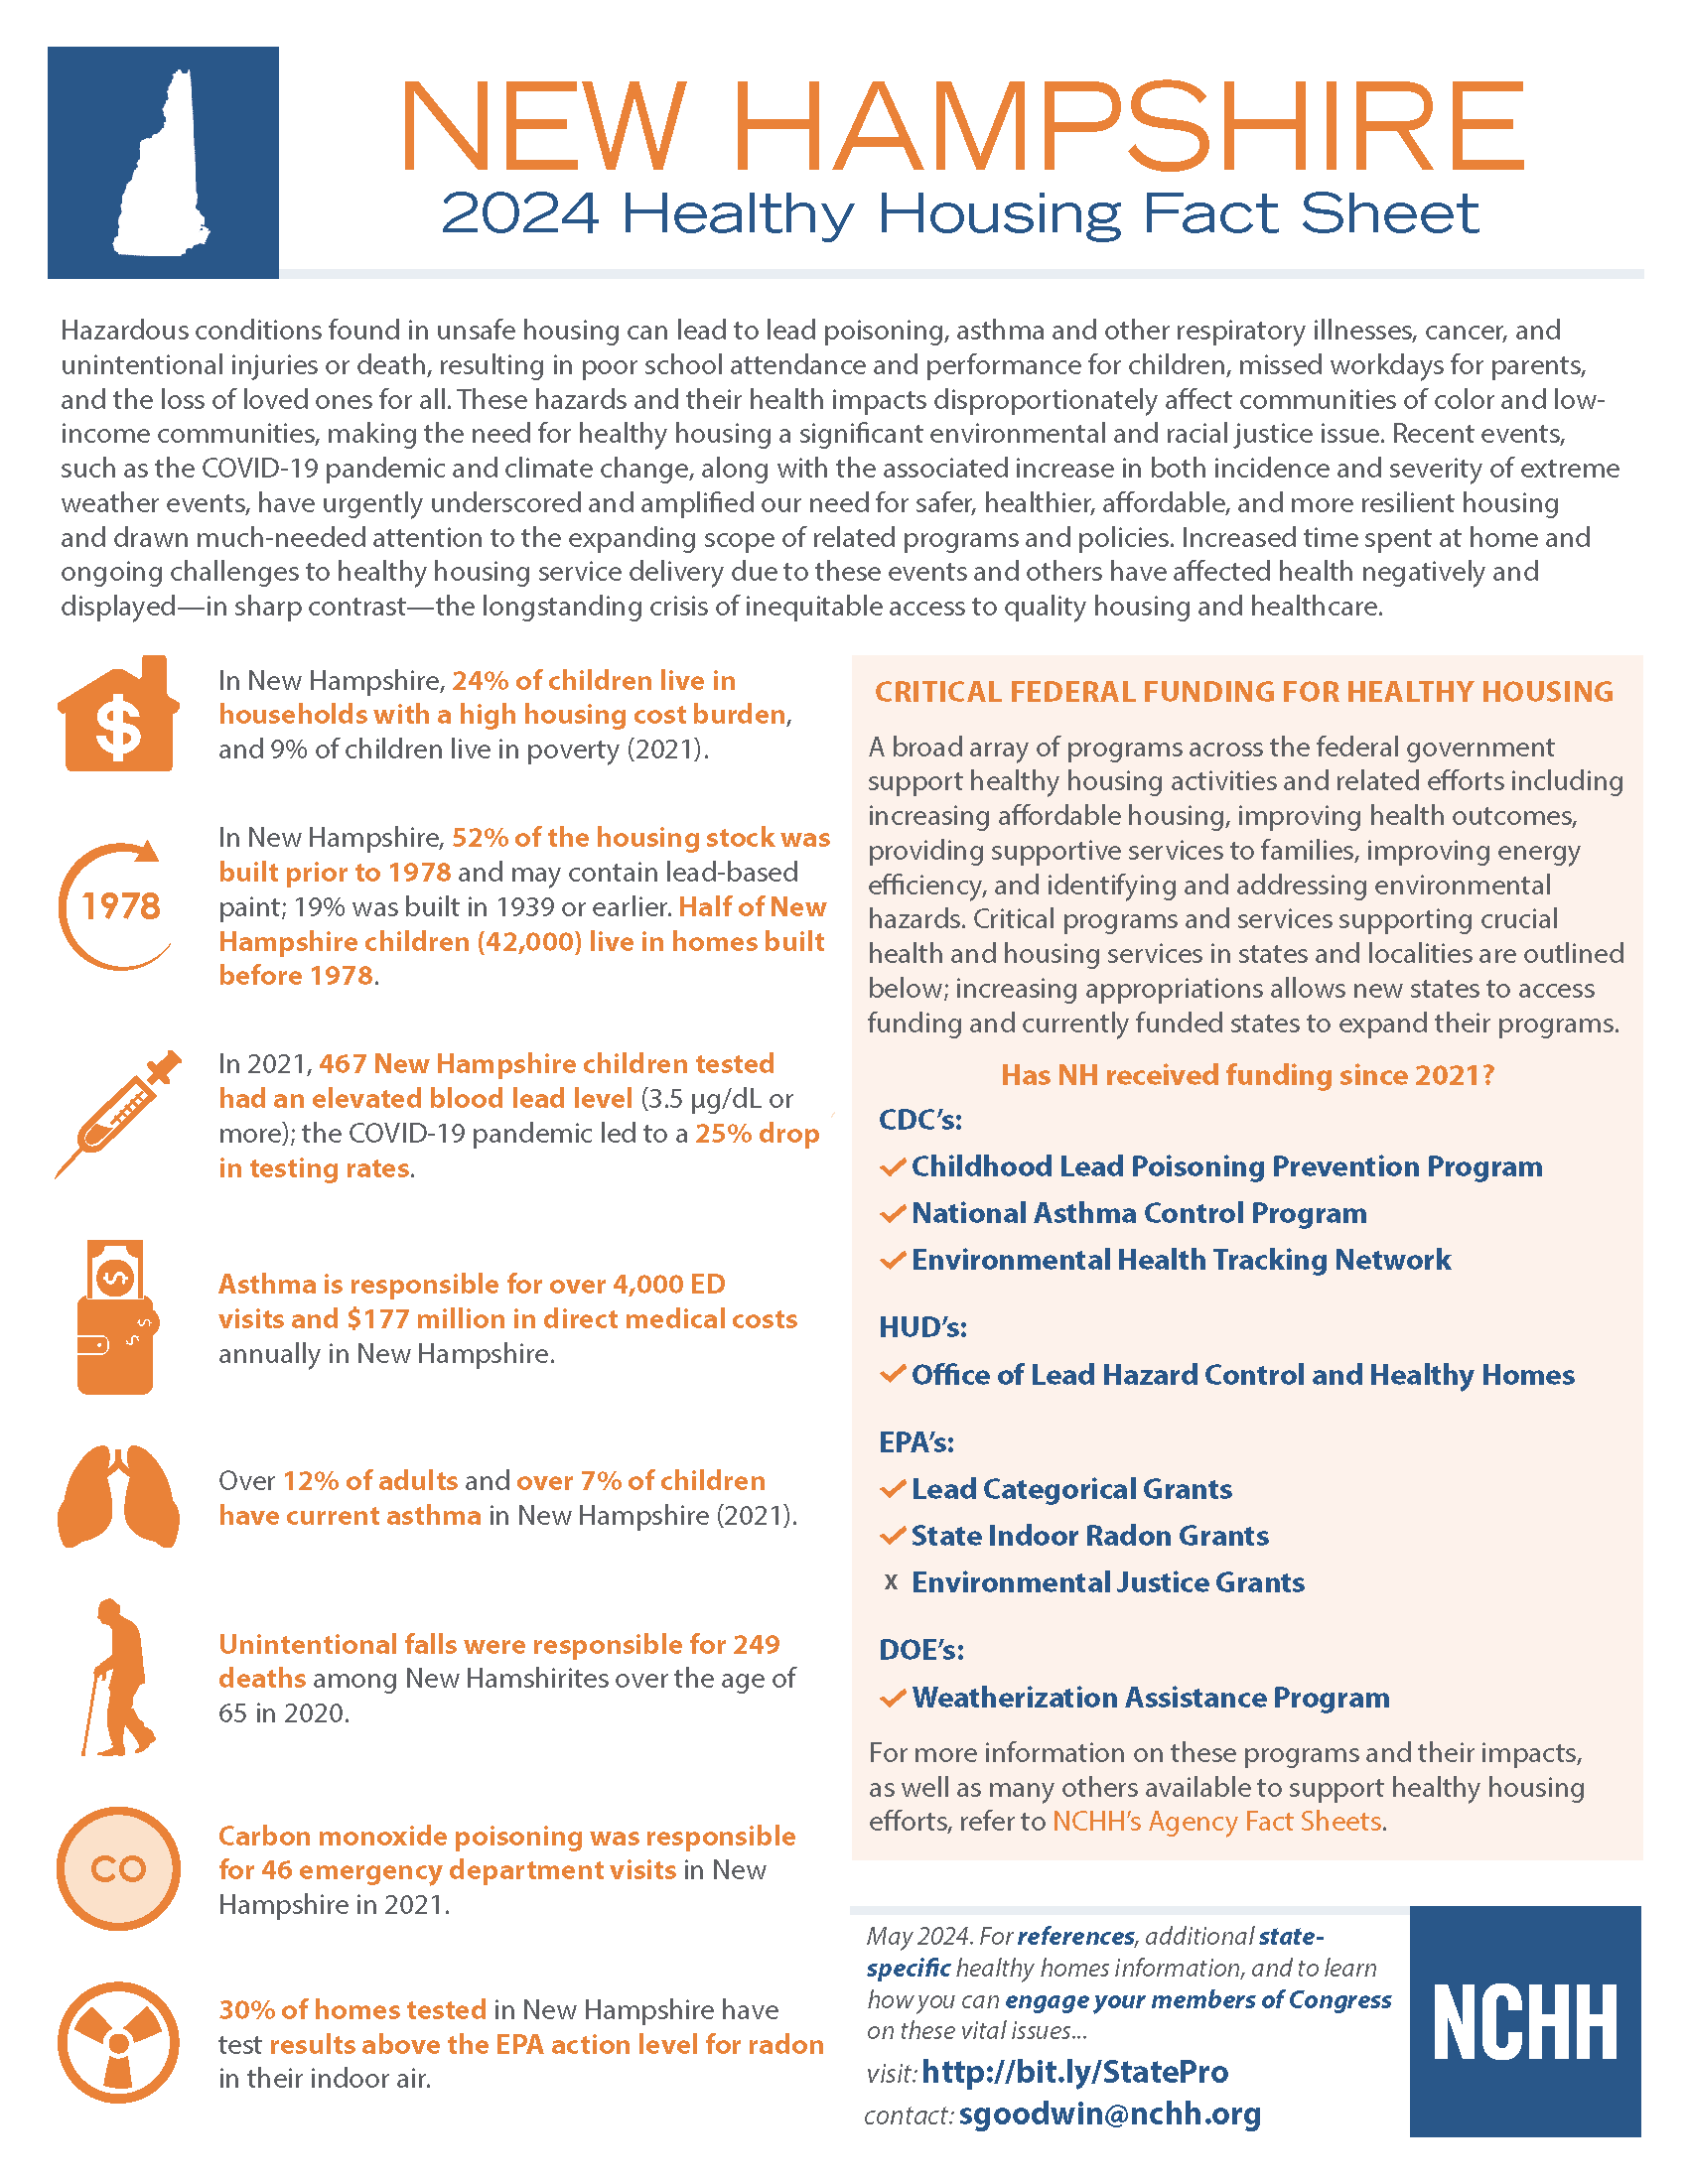 Fact sheet describing the overall environmental health of the state of New Hampshire.